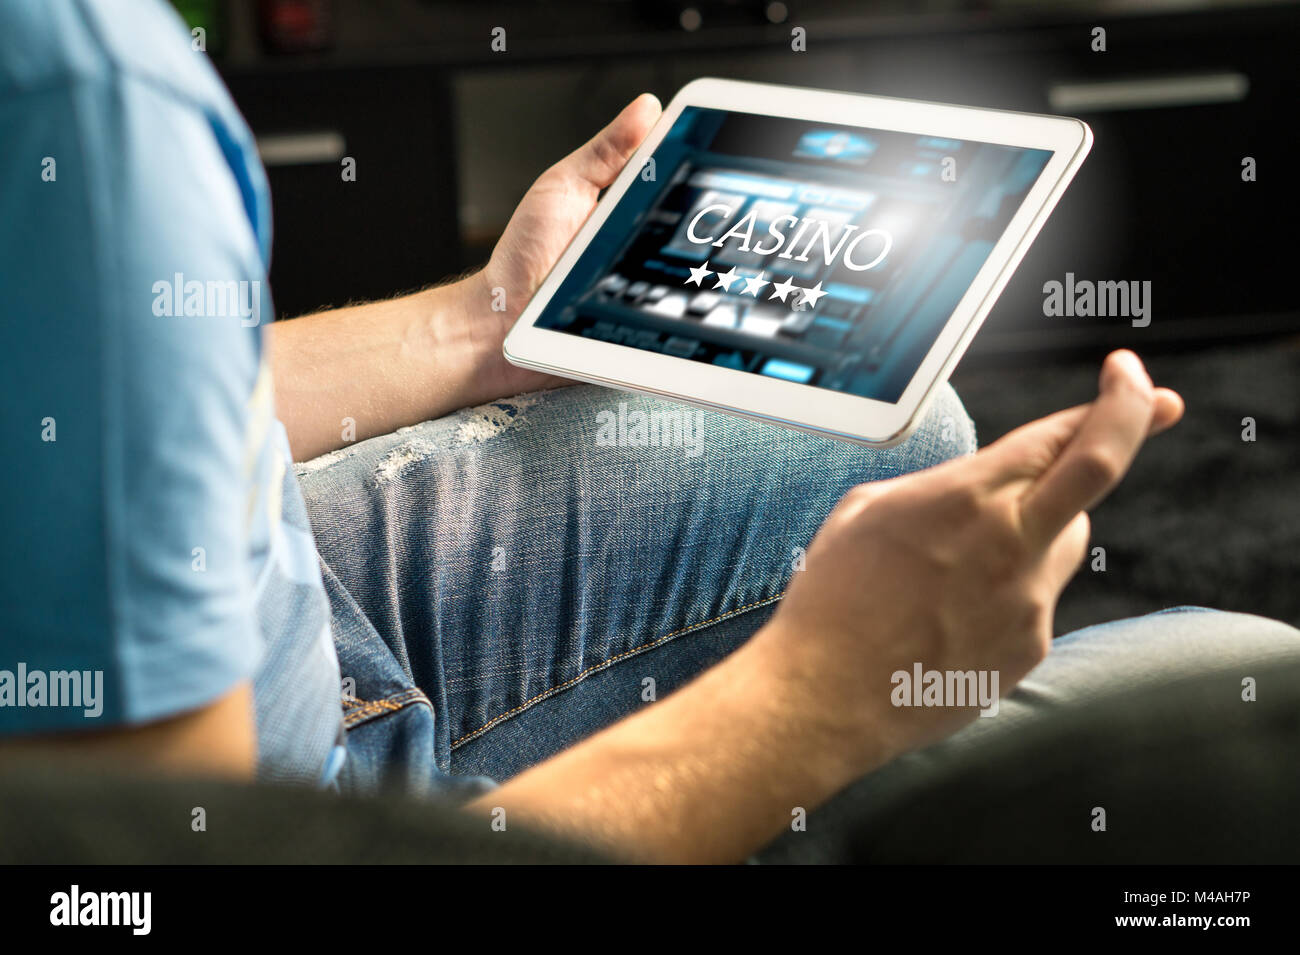 Excited man playing in an online casino with tablet fingers crossed wishing and hoping to win. Slot machine app. Person holding smart mobile device. Stock Photo